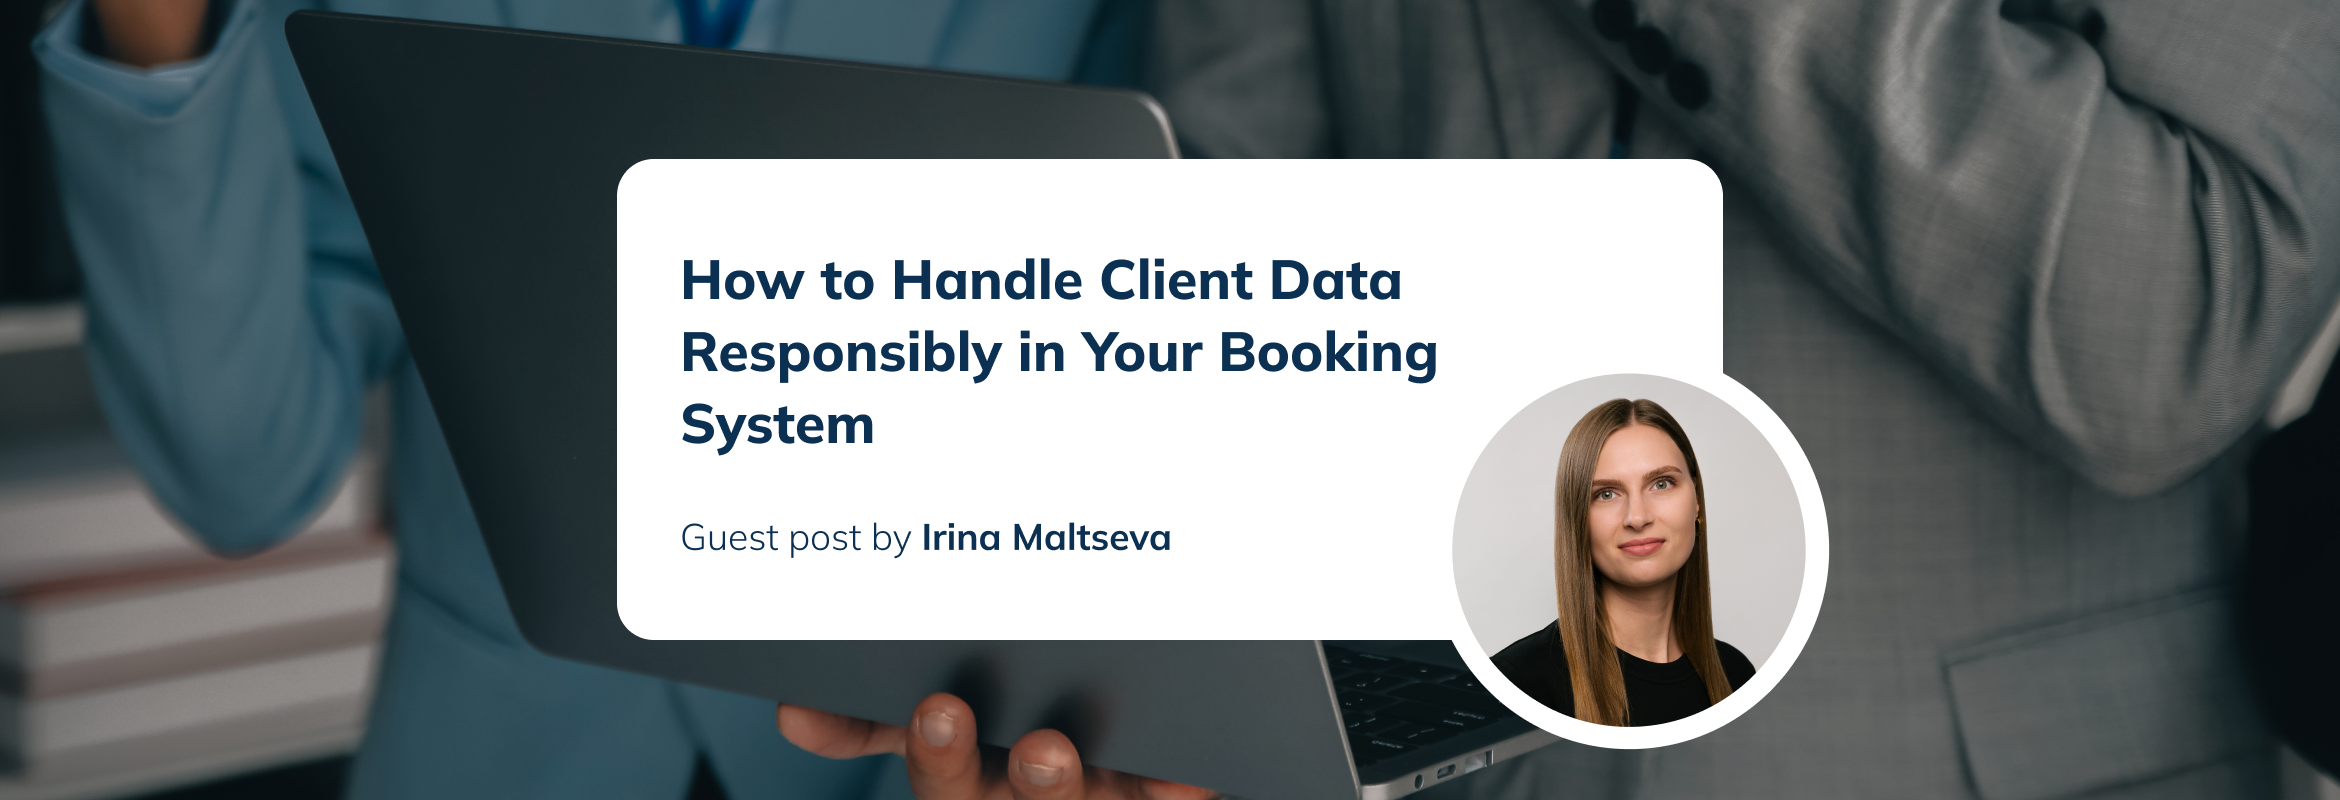 How to Handle Client Data Responsibly in Your Booking System